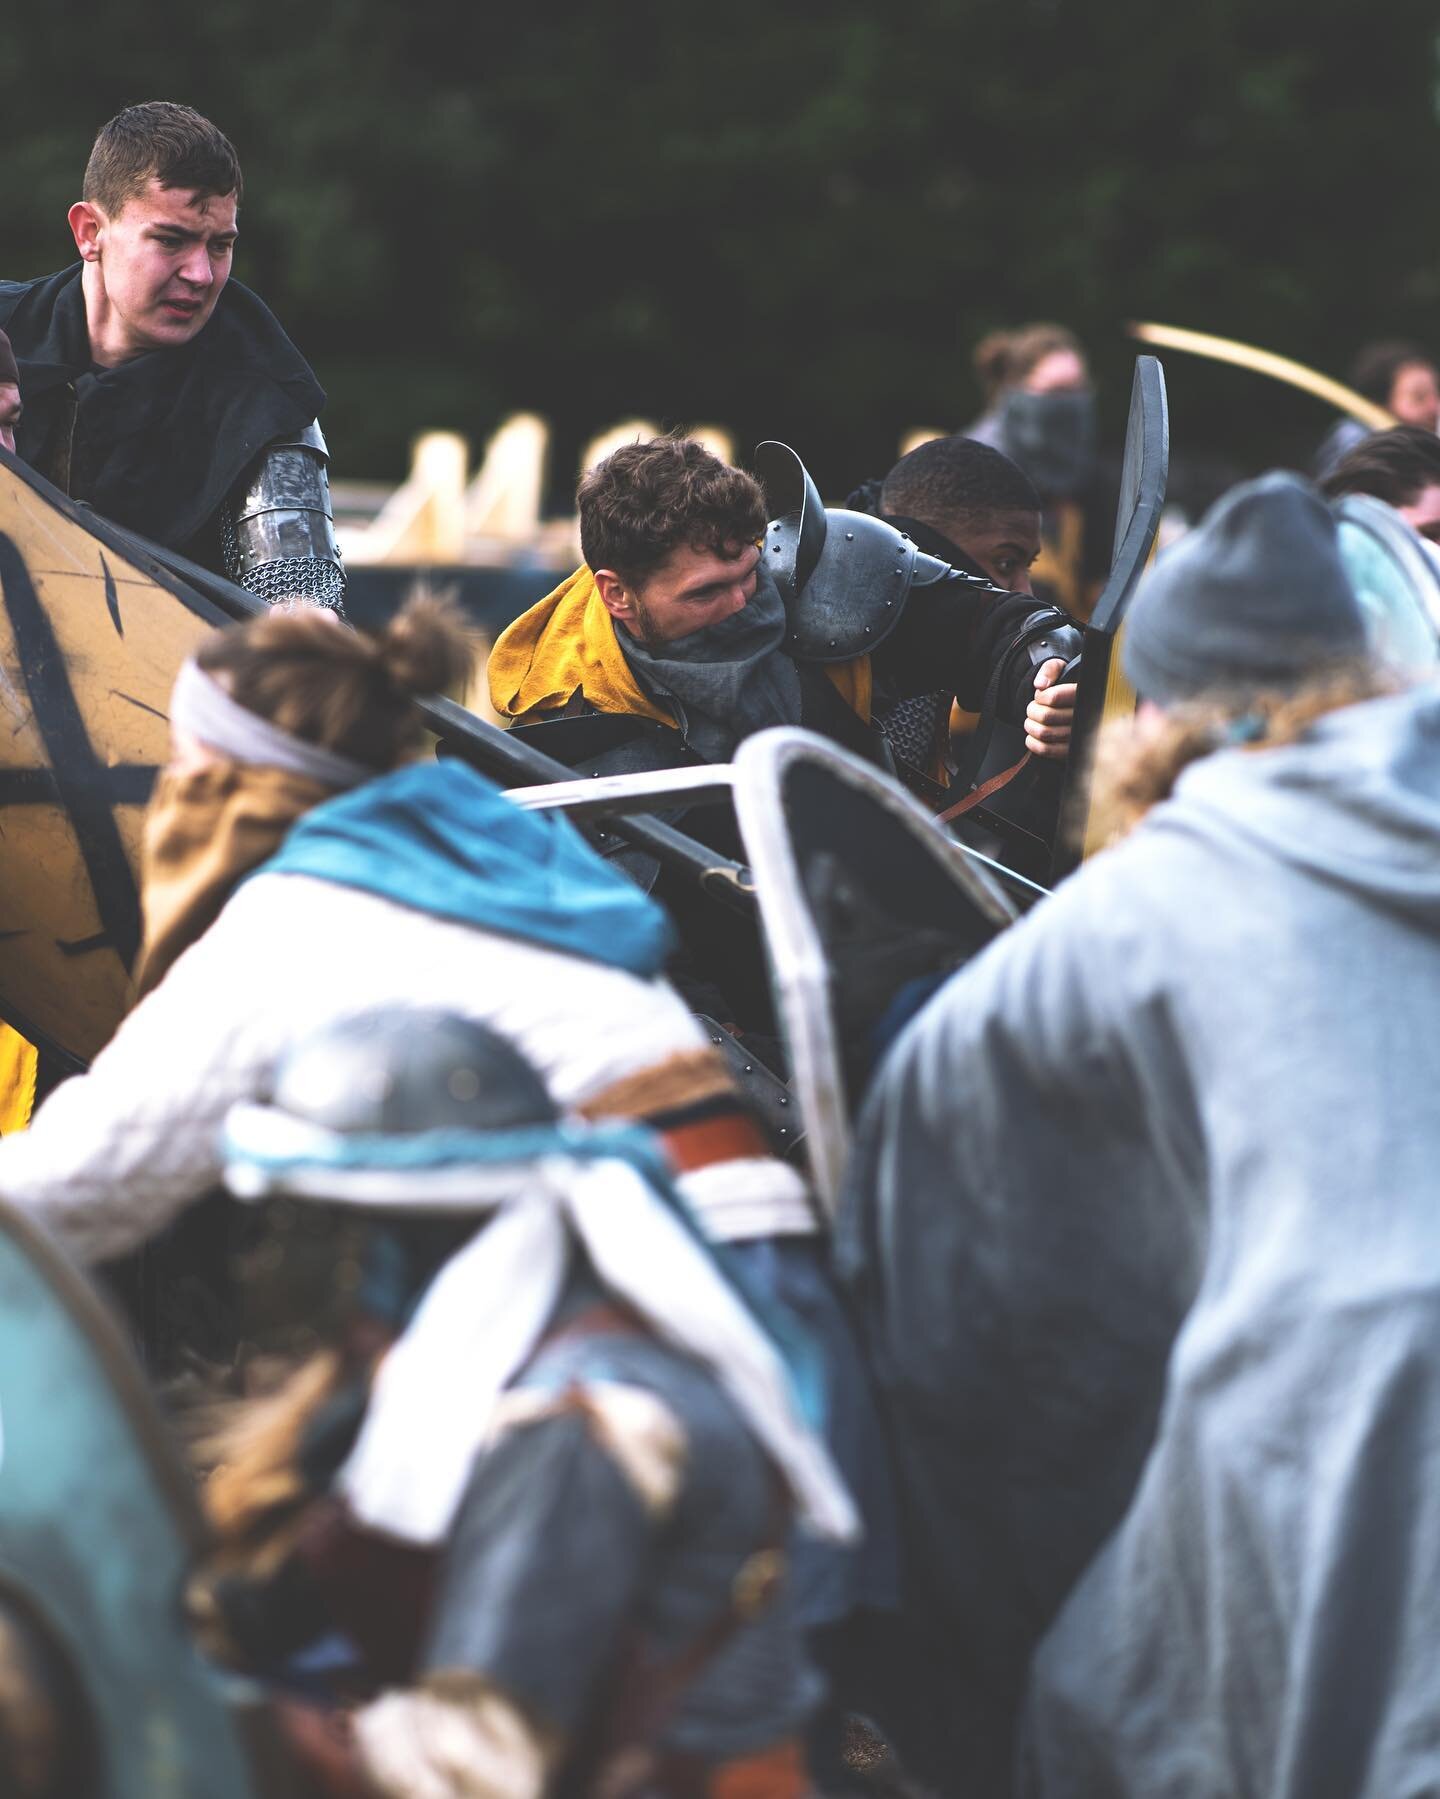 Training Grounds is next week! There are still a few days left to get tickets! (See link in bio) we look forward to seeing you there! ⚔️ 
&mdash;
#medieval #armor #swordfight #cape #cloak #viking #norse #vikings #medievalbattle